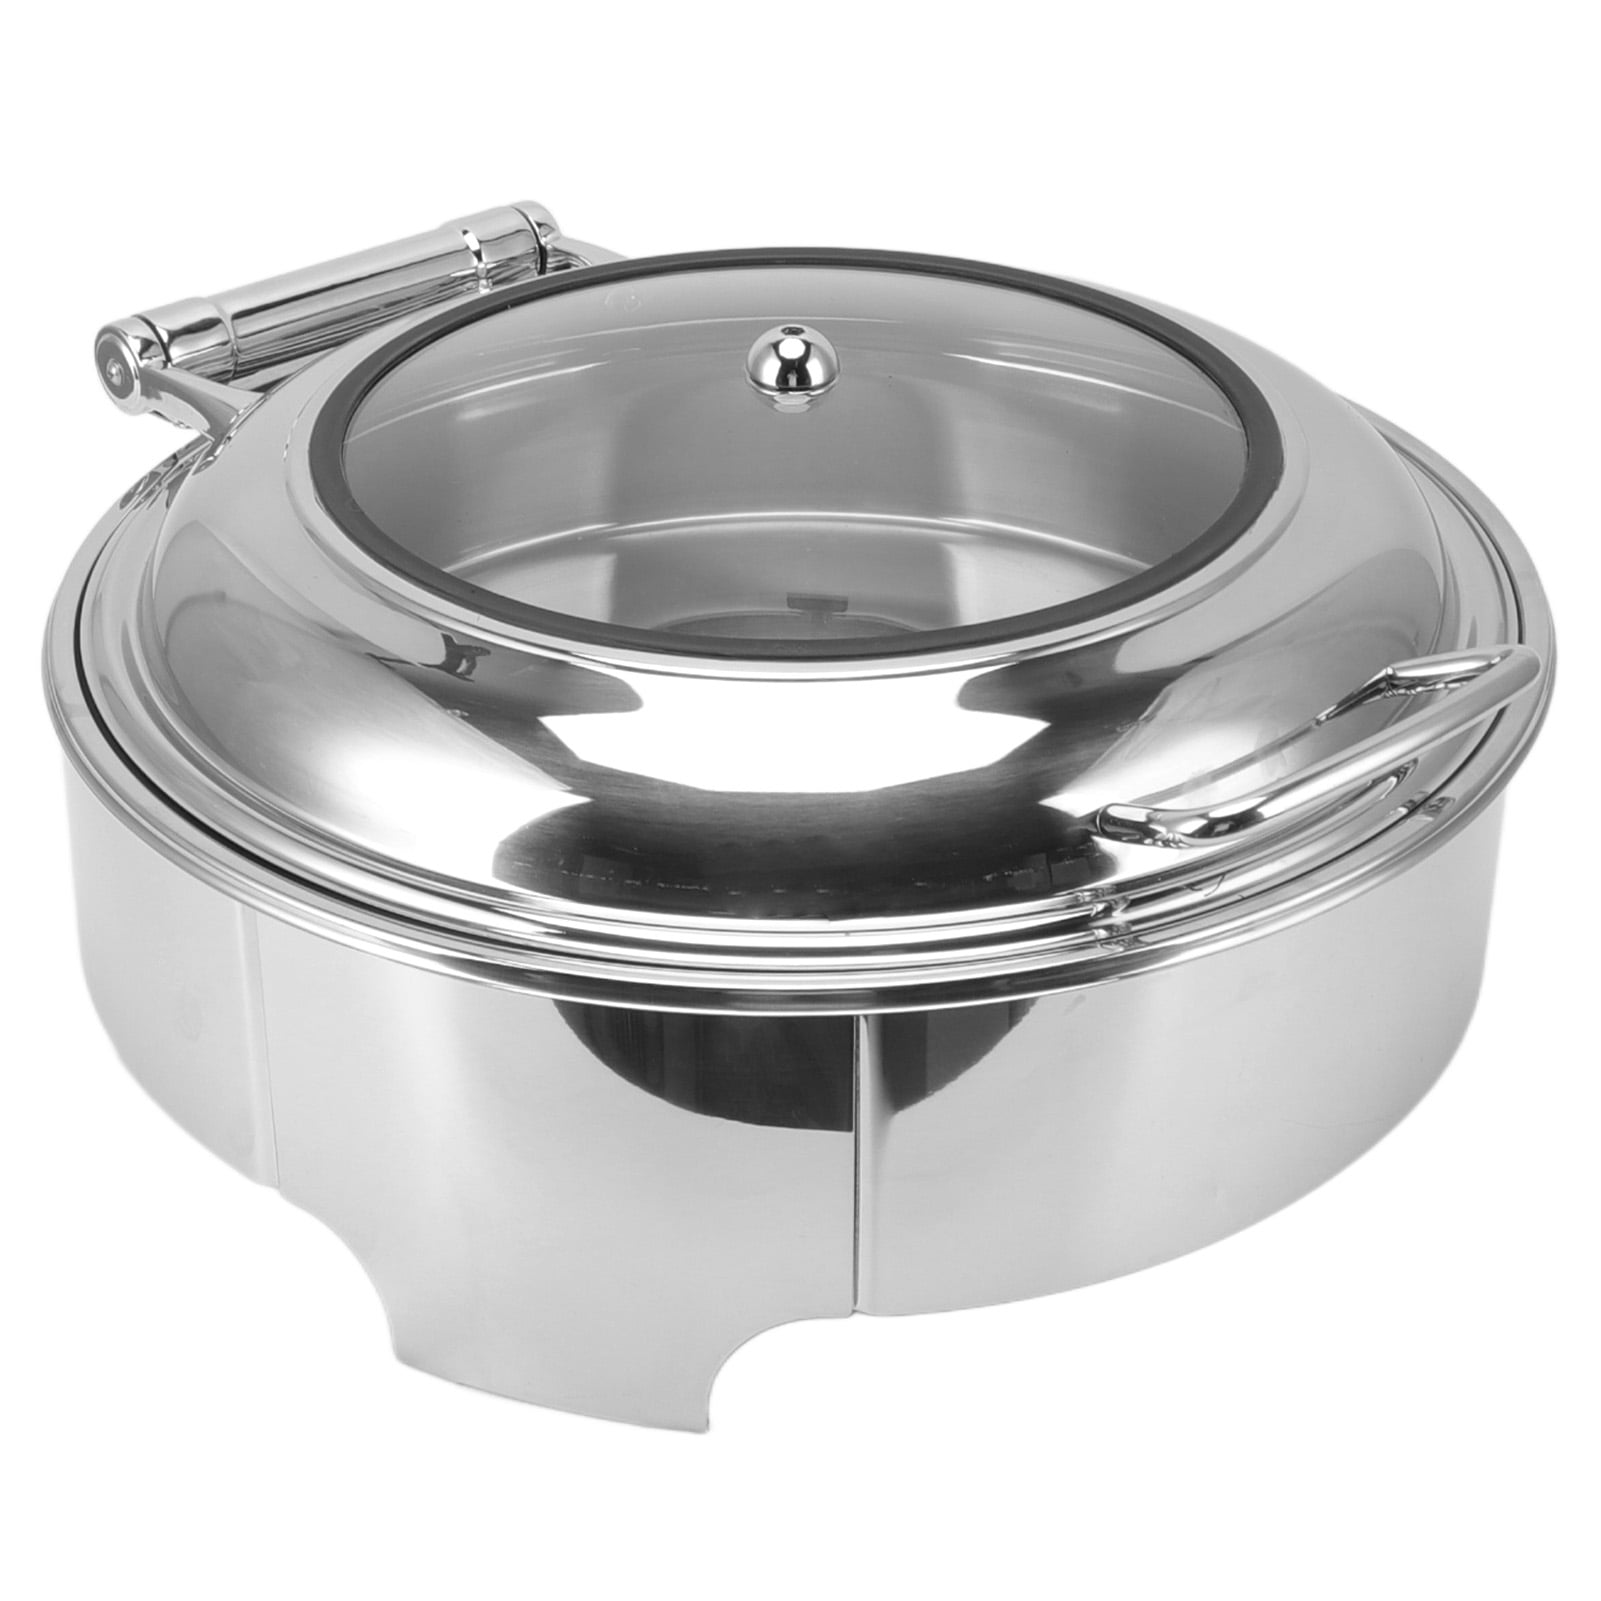 fts food warmer silver round shape